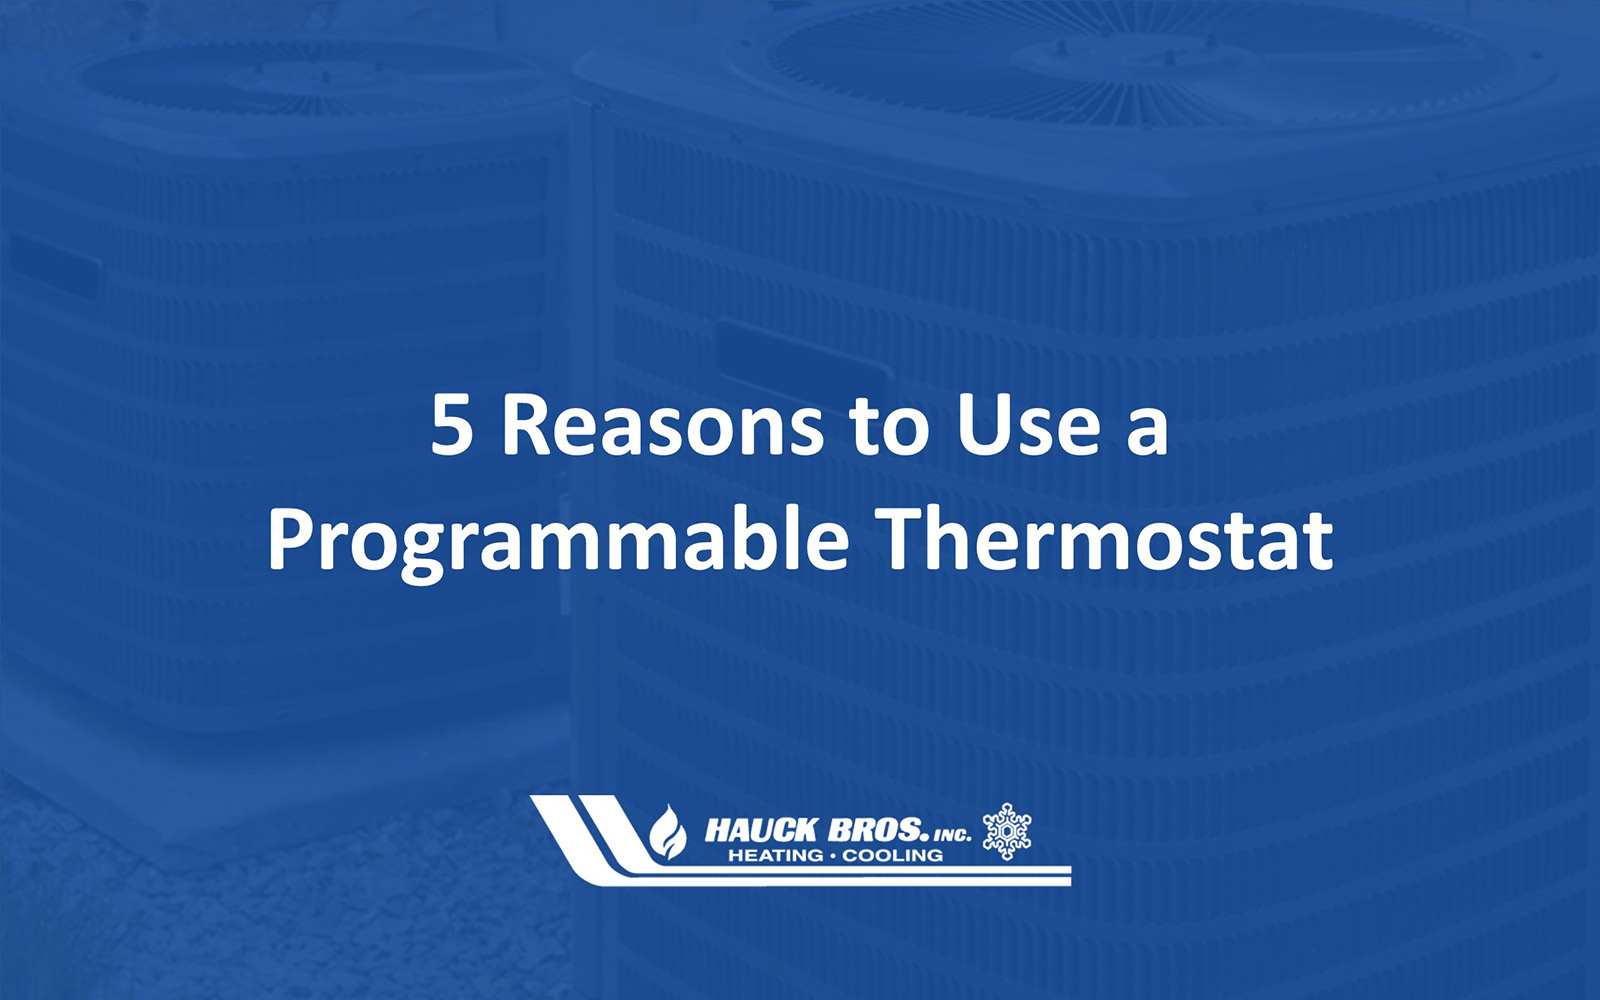 Reasons to Use a Programmable Thermostat